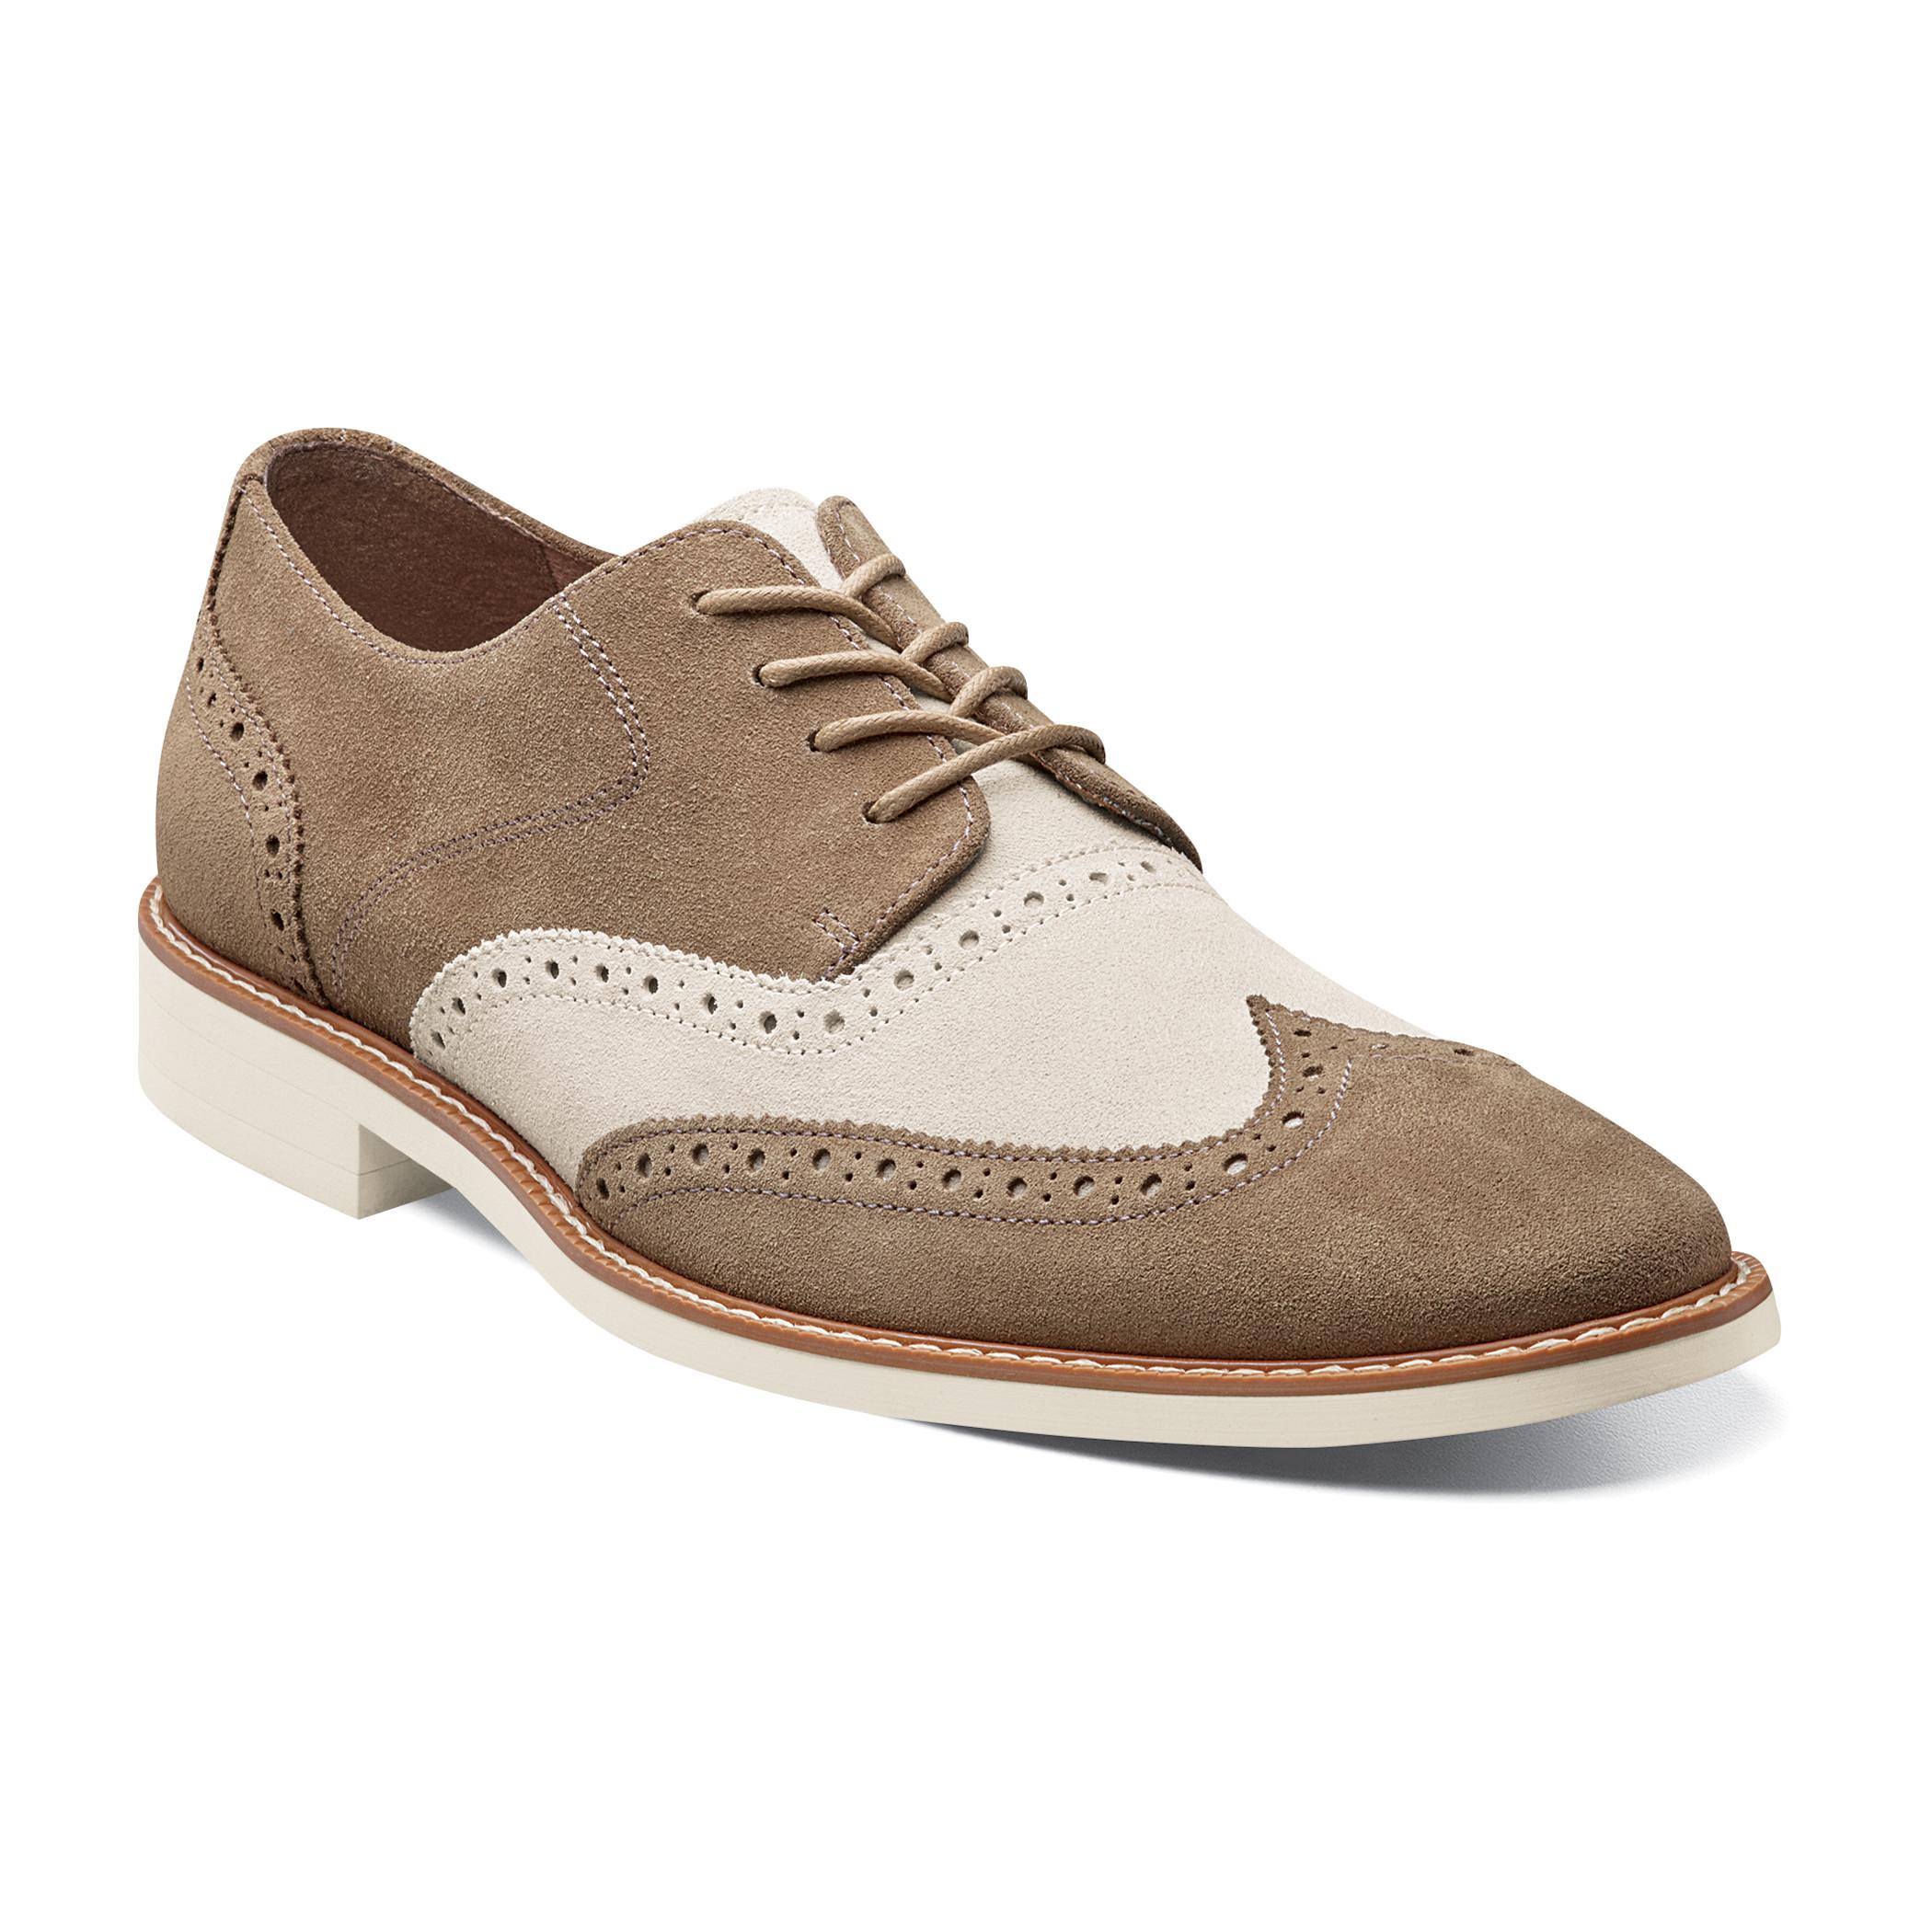 Sand and White Suede Wingtip Shoes 24930 | Stacy Adams Suede Shoes